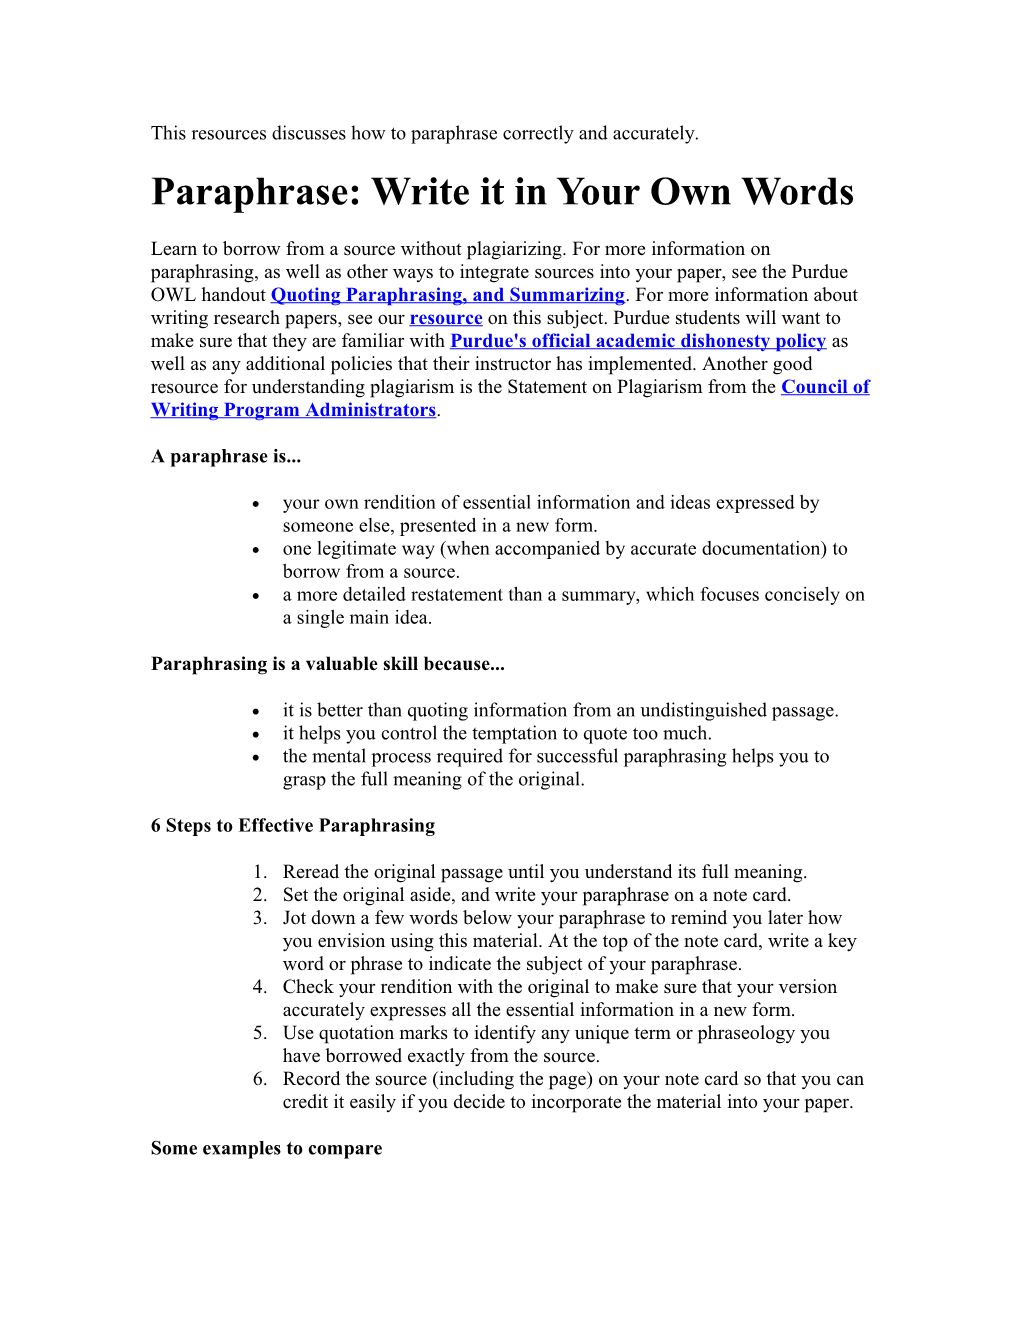 This Resources Discusses How to Paraphrase Correctly and Accurately